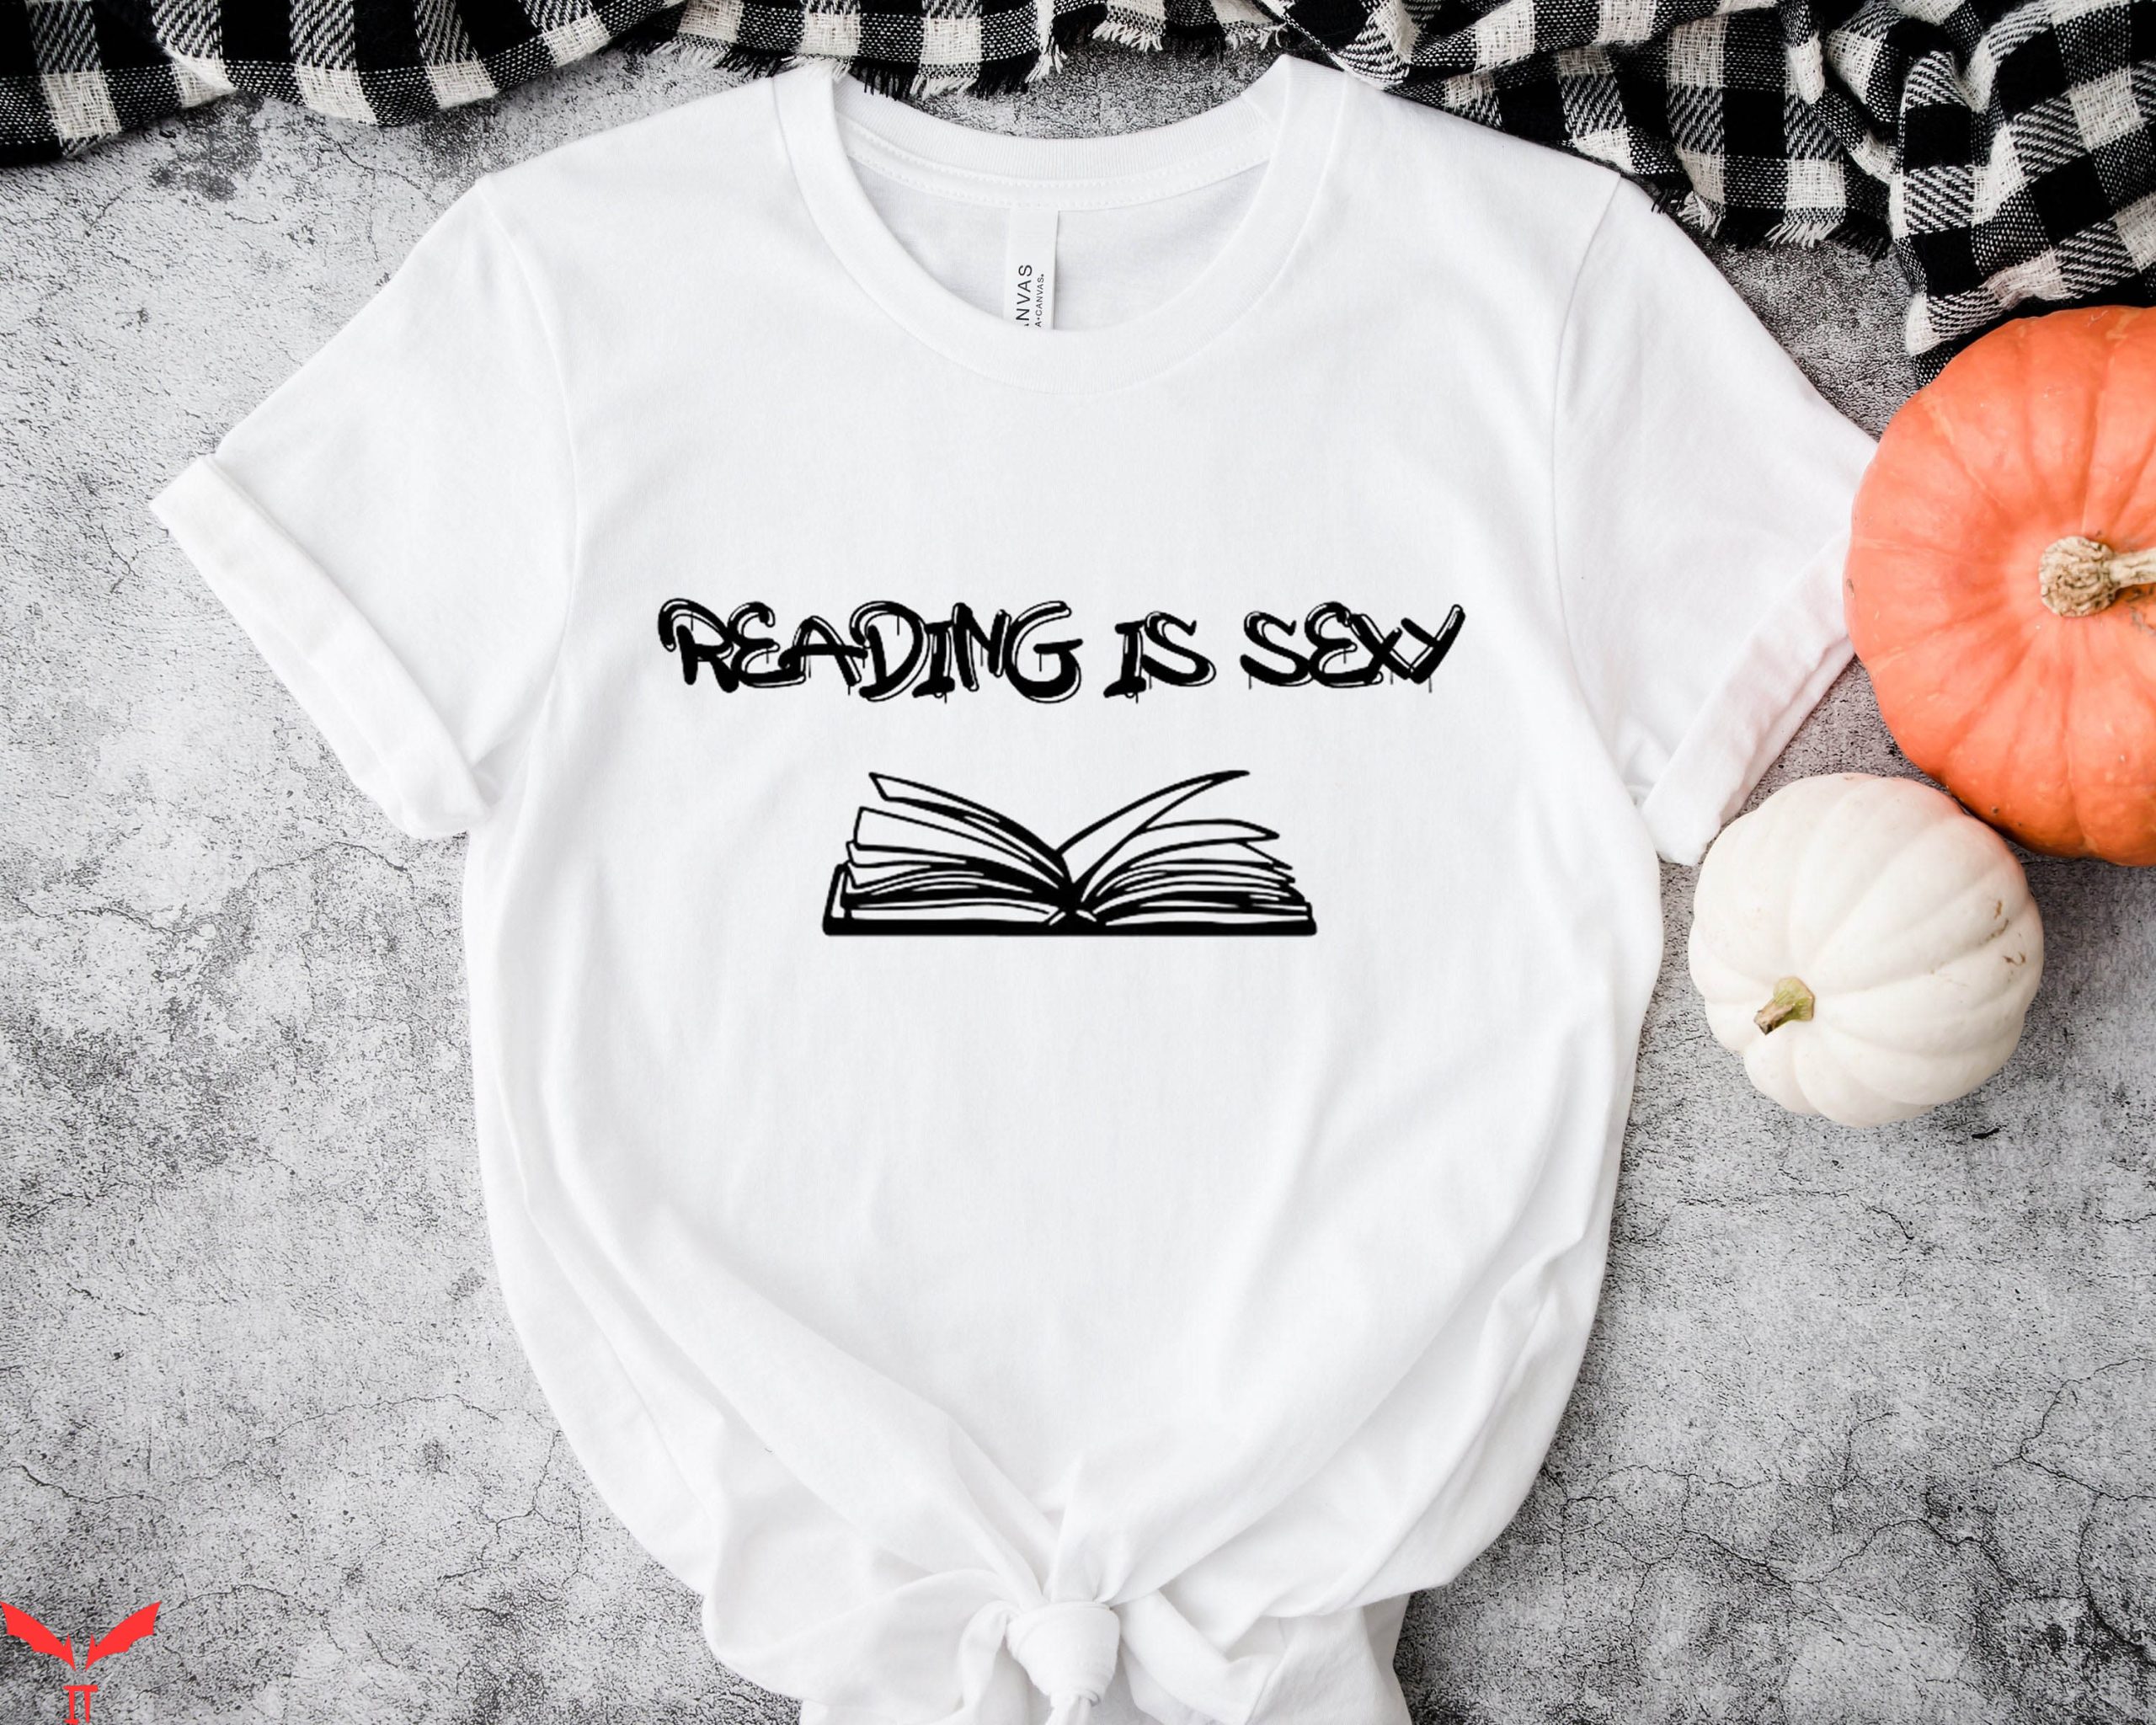 Reading Is Sexy T-Shirt Cool Art Is Survival Esthetic Tee